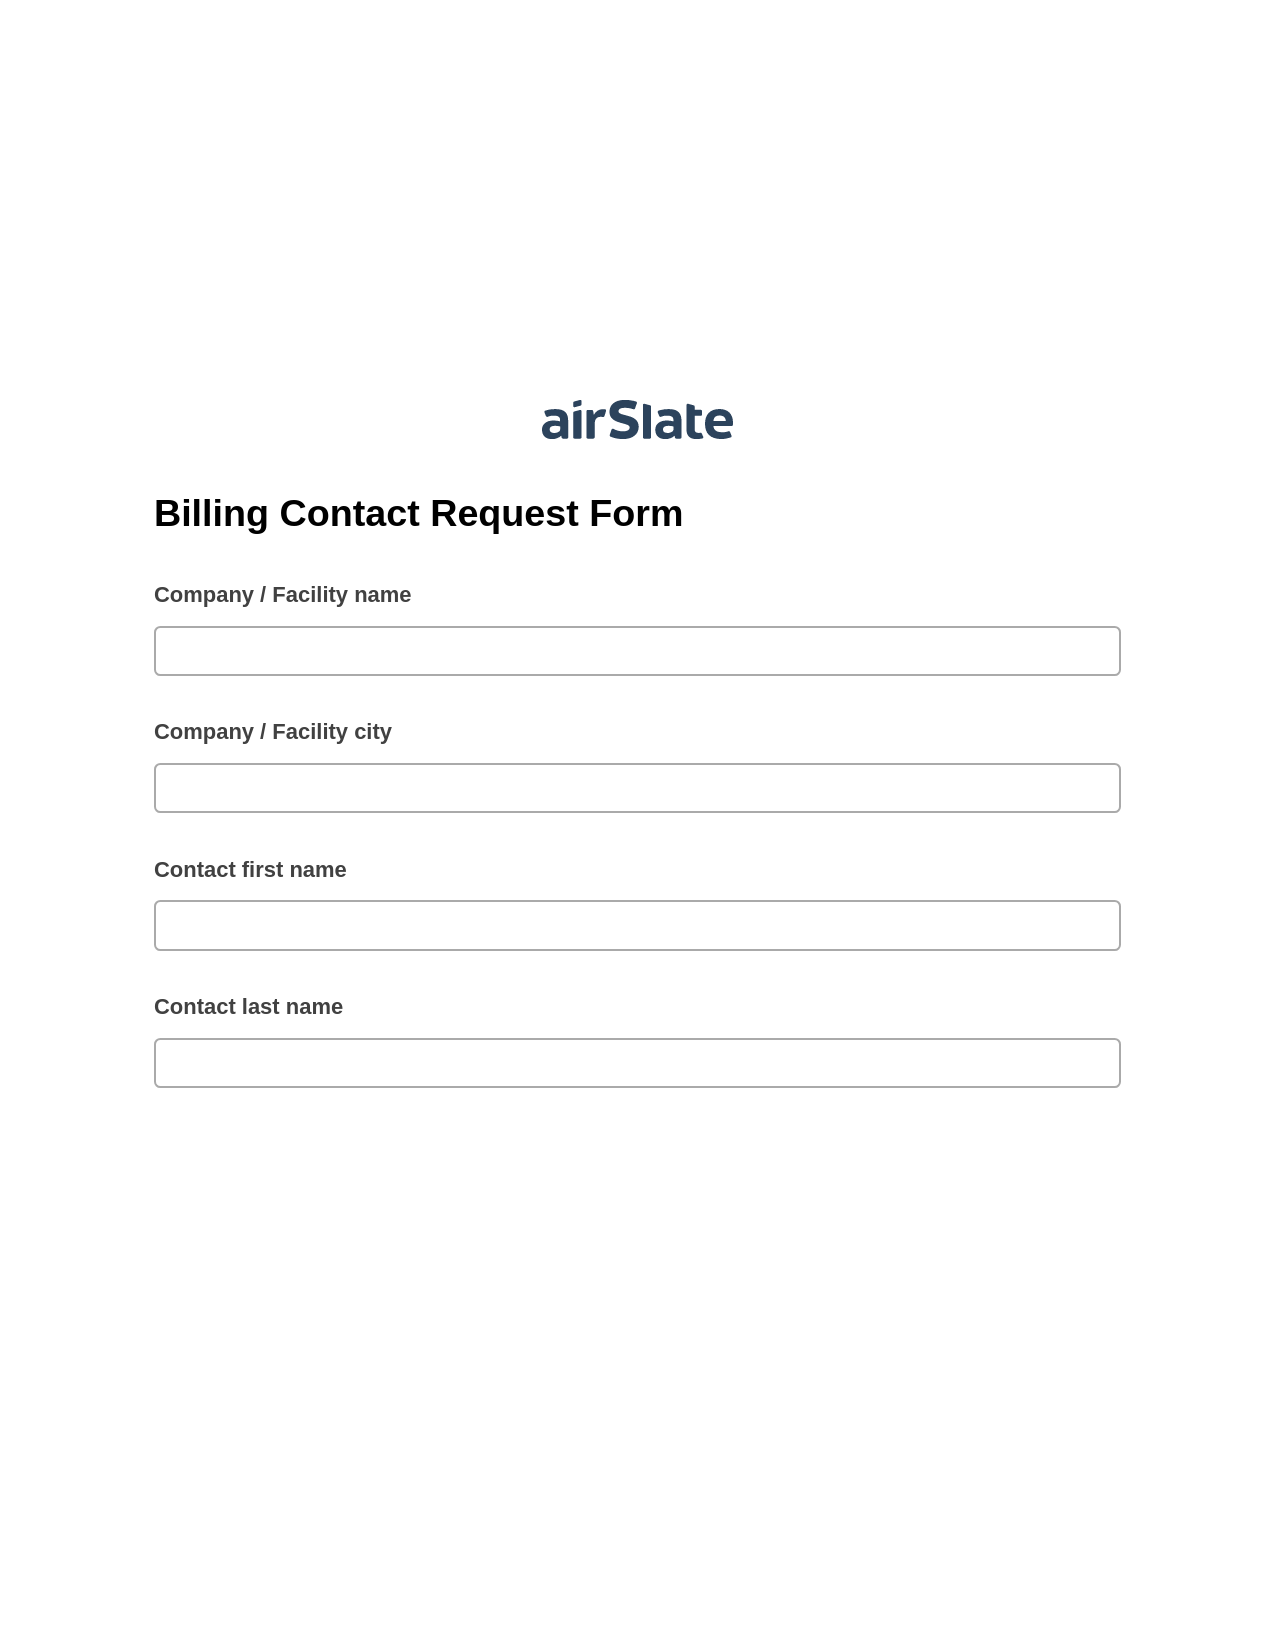 Multirole Billing Contact Request Form Pre-fill Slate from MS Dynamics 365 Records Bot, Update Salesforce Record Bot, Export to Google Sheet Bot